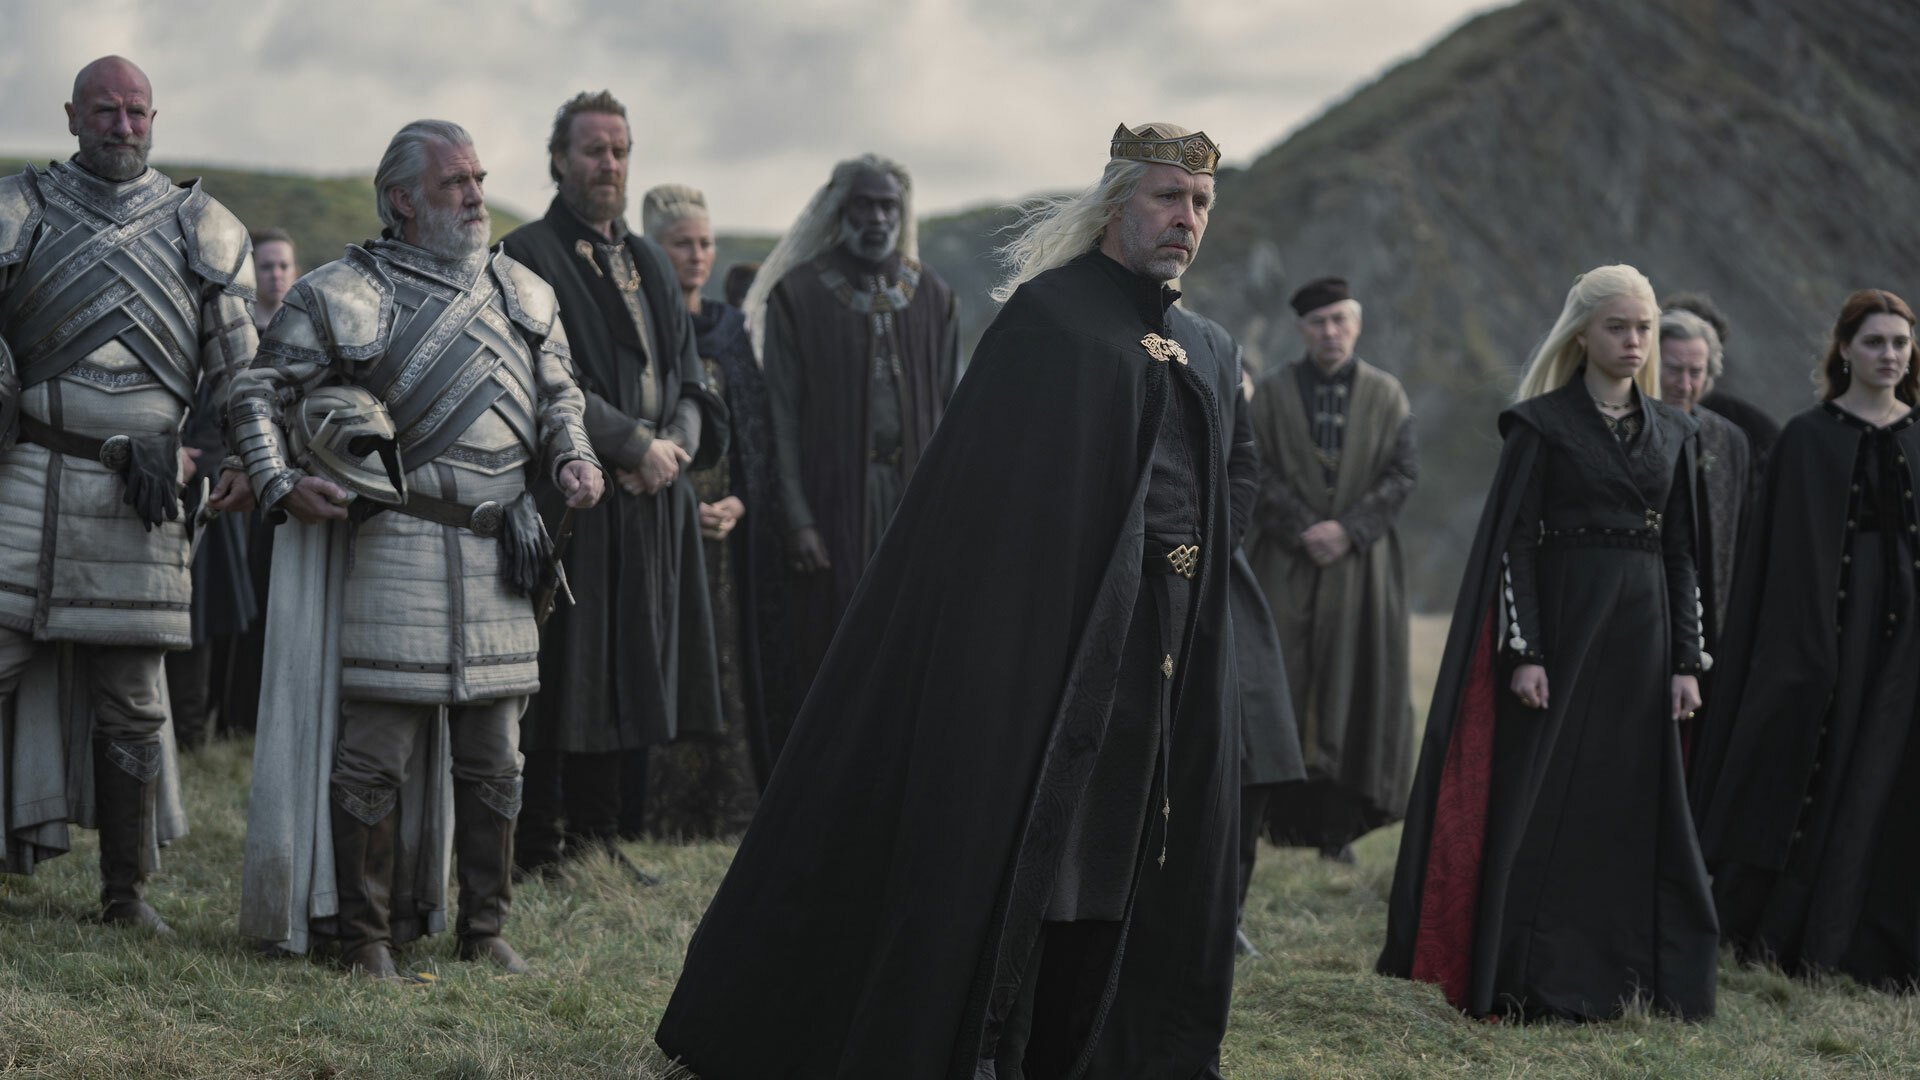 A group of people in mourning clothes, including a King and some knights, stand on the coast.